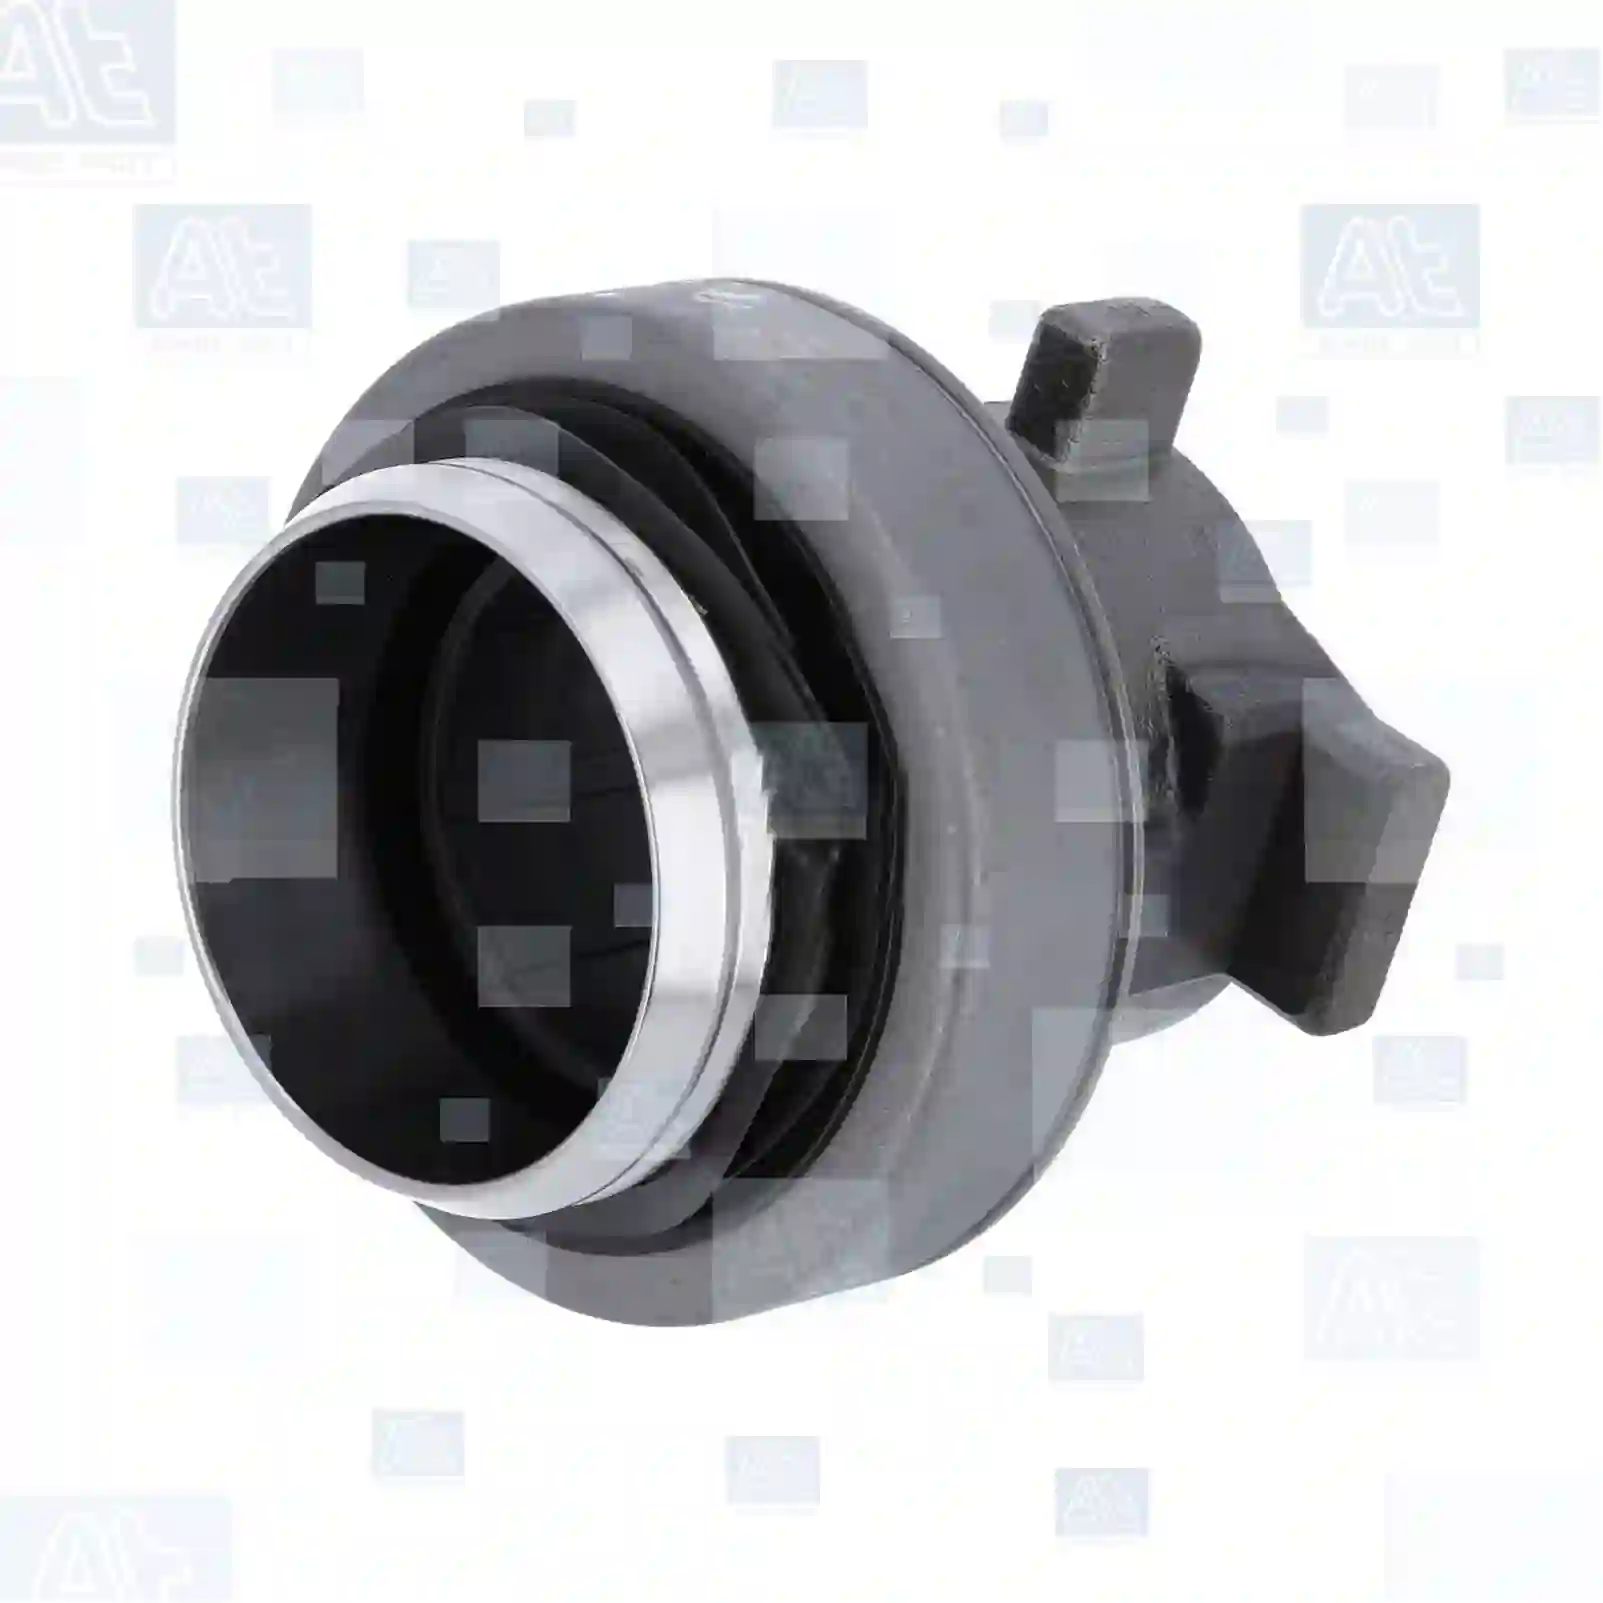 Release bearing, at no 77721927, oem no: 1686642, 1697725, 1746150, 1822487, 1822997, 1830316, 1912687, 47230612, 503138923, 504237895, 504385080, 03144938, 500024666, 503138923, 504237895, 504264338, 504385080, 10492338, 81305500118, 81305500249, 81305500251, 81305500255, 81305500264, 81305500270, 81324120006, 81605500264, 0002543208, 0032502215, 0032508015, 0032508315, 7485127008, 7485137875, TW00717, 07W141165, 2U2141165B, ZG30346-0008 At Spare Part | Engine, Accelerator Pedal, Camshaft, Connecting Rod, Crankcase, Crankshaft, Cylinder Head, Engine Suspension Mountings, Exhaust Manifold, Exhaust Gas Recirculation, Filter Kits, Flywheel Housing, General Overhaul Kits, Engine, Intake Manifold, Oil Cleaner, Oil Cooler, Oil Filter, Oil Pump, Oil Sump, Piston & Liner, Sensor & Switch, Timing Case, Turbocharger, Cooling System, Belt Tensioner, Coolant Filter, Coolant Pipe, Corrosion Prevention Agent, Drive, Expansion Tank, Fan, Intercooler, Monitors & Gauges, Radiator, Thermostat, V-Belt / Timing belt, Water Pump, Fuel System, Electronical Injector Unit, Feed Pump, Fuel Filter, cpl., Fuel Gauge Sender,  Fuel Line, Fuel Pump, Fuel Tank, Injection Line Kit, Injection Pump, Exhaust System, Clutch & Pedal, Gearbox, Propeller Shaft, Axles, Brake System, Hubs & Wheels, Suspension, Leaf Spring, Universal Parts / Accessories, Steering, Electrical System, Cabin Release bearing, at no 77721927, oem no: 1686642, 1697725, 1746150, 1822487, 1822997, 1830316, 1912687, 47230612, 503138923, 504237895, 504385080, 03144938, 500024666, 503138923, 504237895, 504264338, 504385080, 10492338, 81305500118, 81305500249, 81305500251, 81305500255, 81305500264, 81305500270, 81324120006, 81605500264, 0002543208, 0032502215, 0032508015, 0032508315, 7485127008, 7485137875, TW00717, 07W141165, 2U2141165B, ZG30346-0008 At Spare Part | Engine, Accelerator Pedal, Camshaft, Connecting Rod, Crankcase, Crankshaft, Cylinder Head, Engine Suspension Mountings, Exhaust Manifold, Exhaust Gas Recirculation, Filter Kits, Flywheel Housing, General Overhaul Kits, Engine, Intake Manifold, Oil Cleaner, Oil Cooler, Oil Filter, Oil Pump, Oil Sump, Piston & Liner, Sensor & Switch, Timing Case, Turbocharger, Cooling System, Belt Tensioner, Coolant Filter, Coolant Pipe, Corrosion Prevention Agent, Drive, Expansion Tank, Fan, Intercooler, Monitors & Gauges, Radiator, Thermostat, V-Belt / Timing belt, Water Pump, Fuel System, Electronical Injector Unit, Feed Pump, Fuel Filter, cpl., Fuel Gauge Sender,  Fuel Line, Fuel Pump, Fuel Tank, Injection Line Kit, Injection Pump, Exhaust System, Clutch & Pedal, Gearbox, Propeller Shaft, Axles, Brake System, Hubs & Wheels, Suspension, Leaf Spring, Universal Parts / Accessories, Steering, Electrical System, Cabin